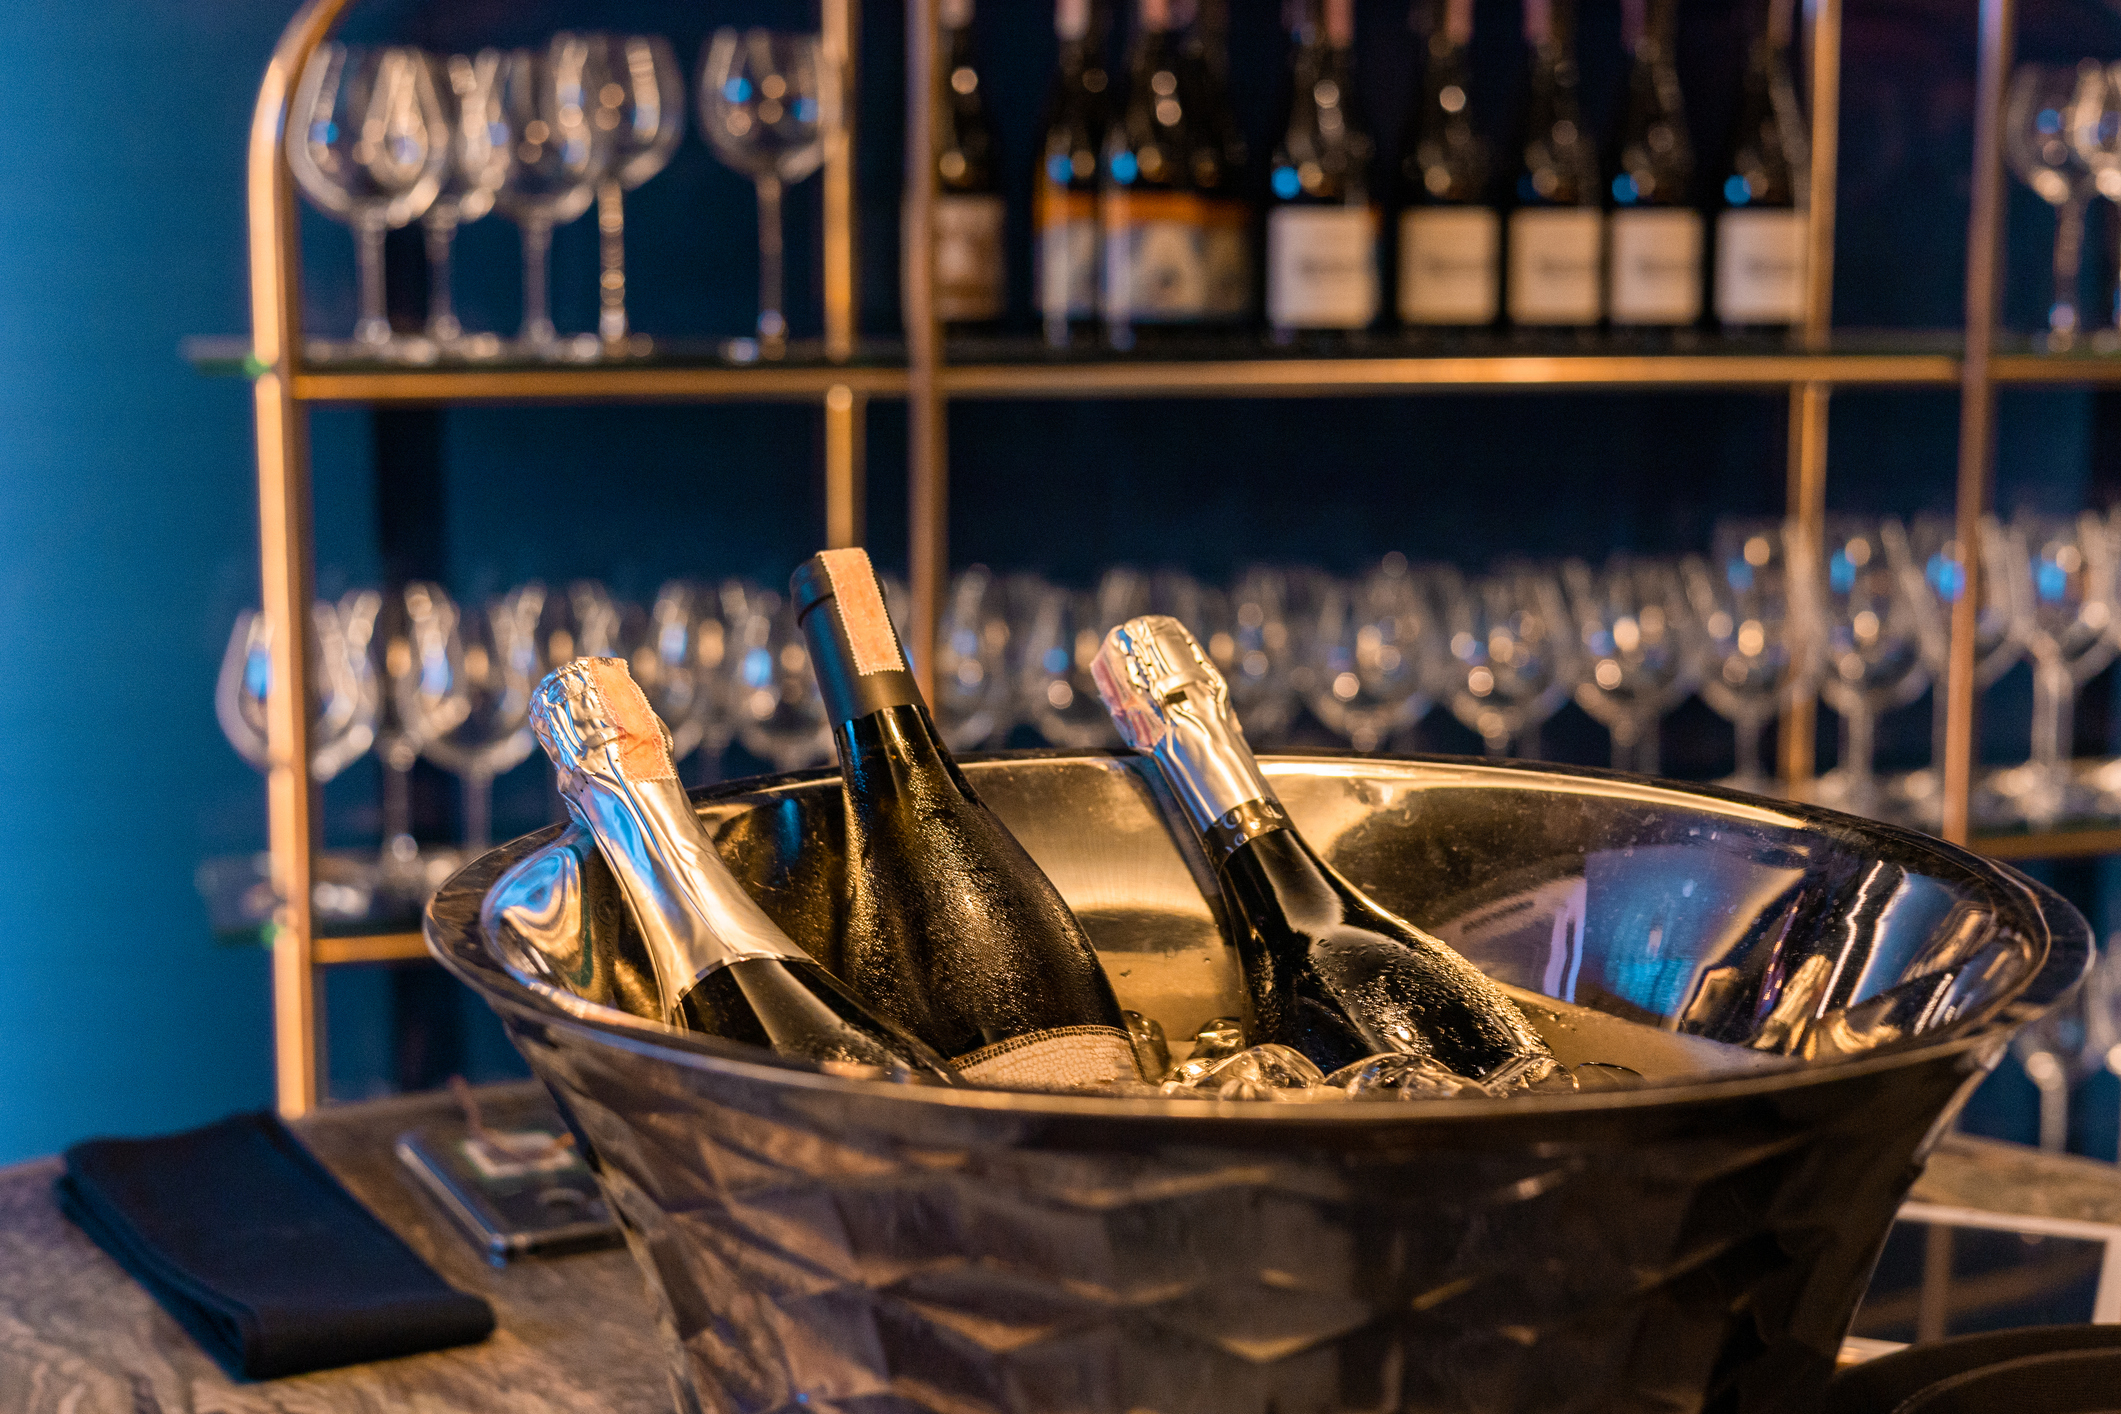 Champagne bottles in ice bucket on bar counter with glasses and bottles in background